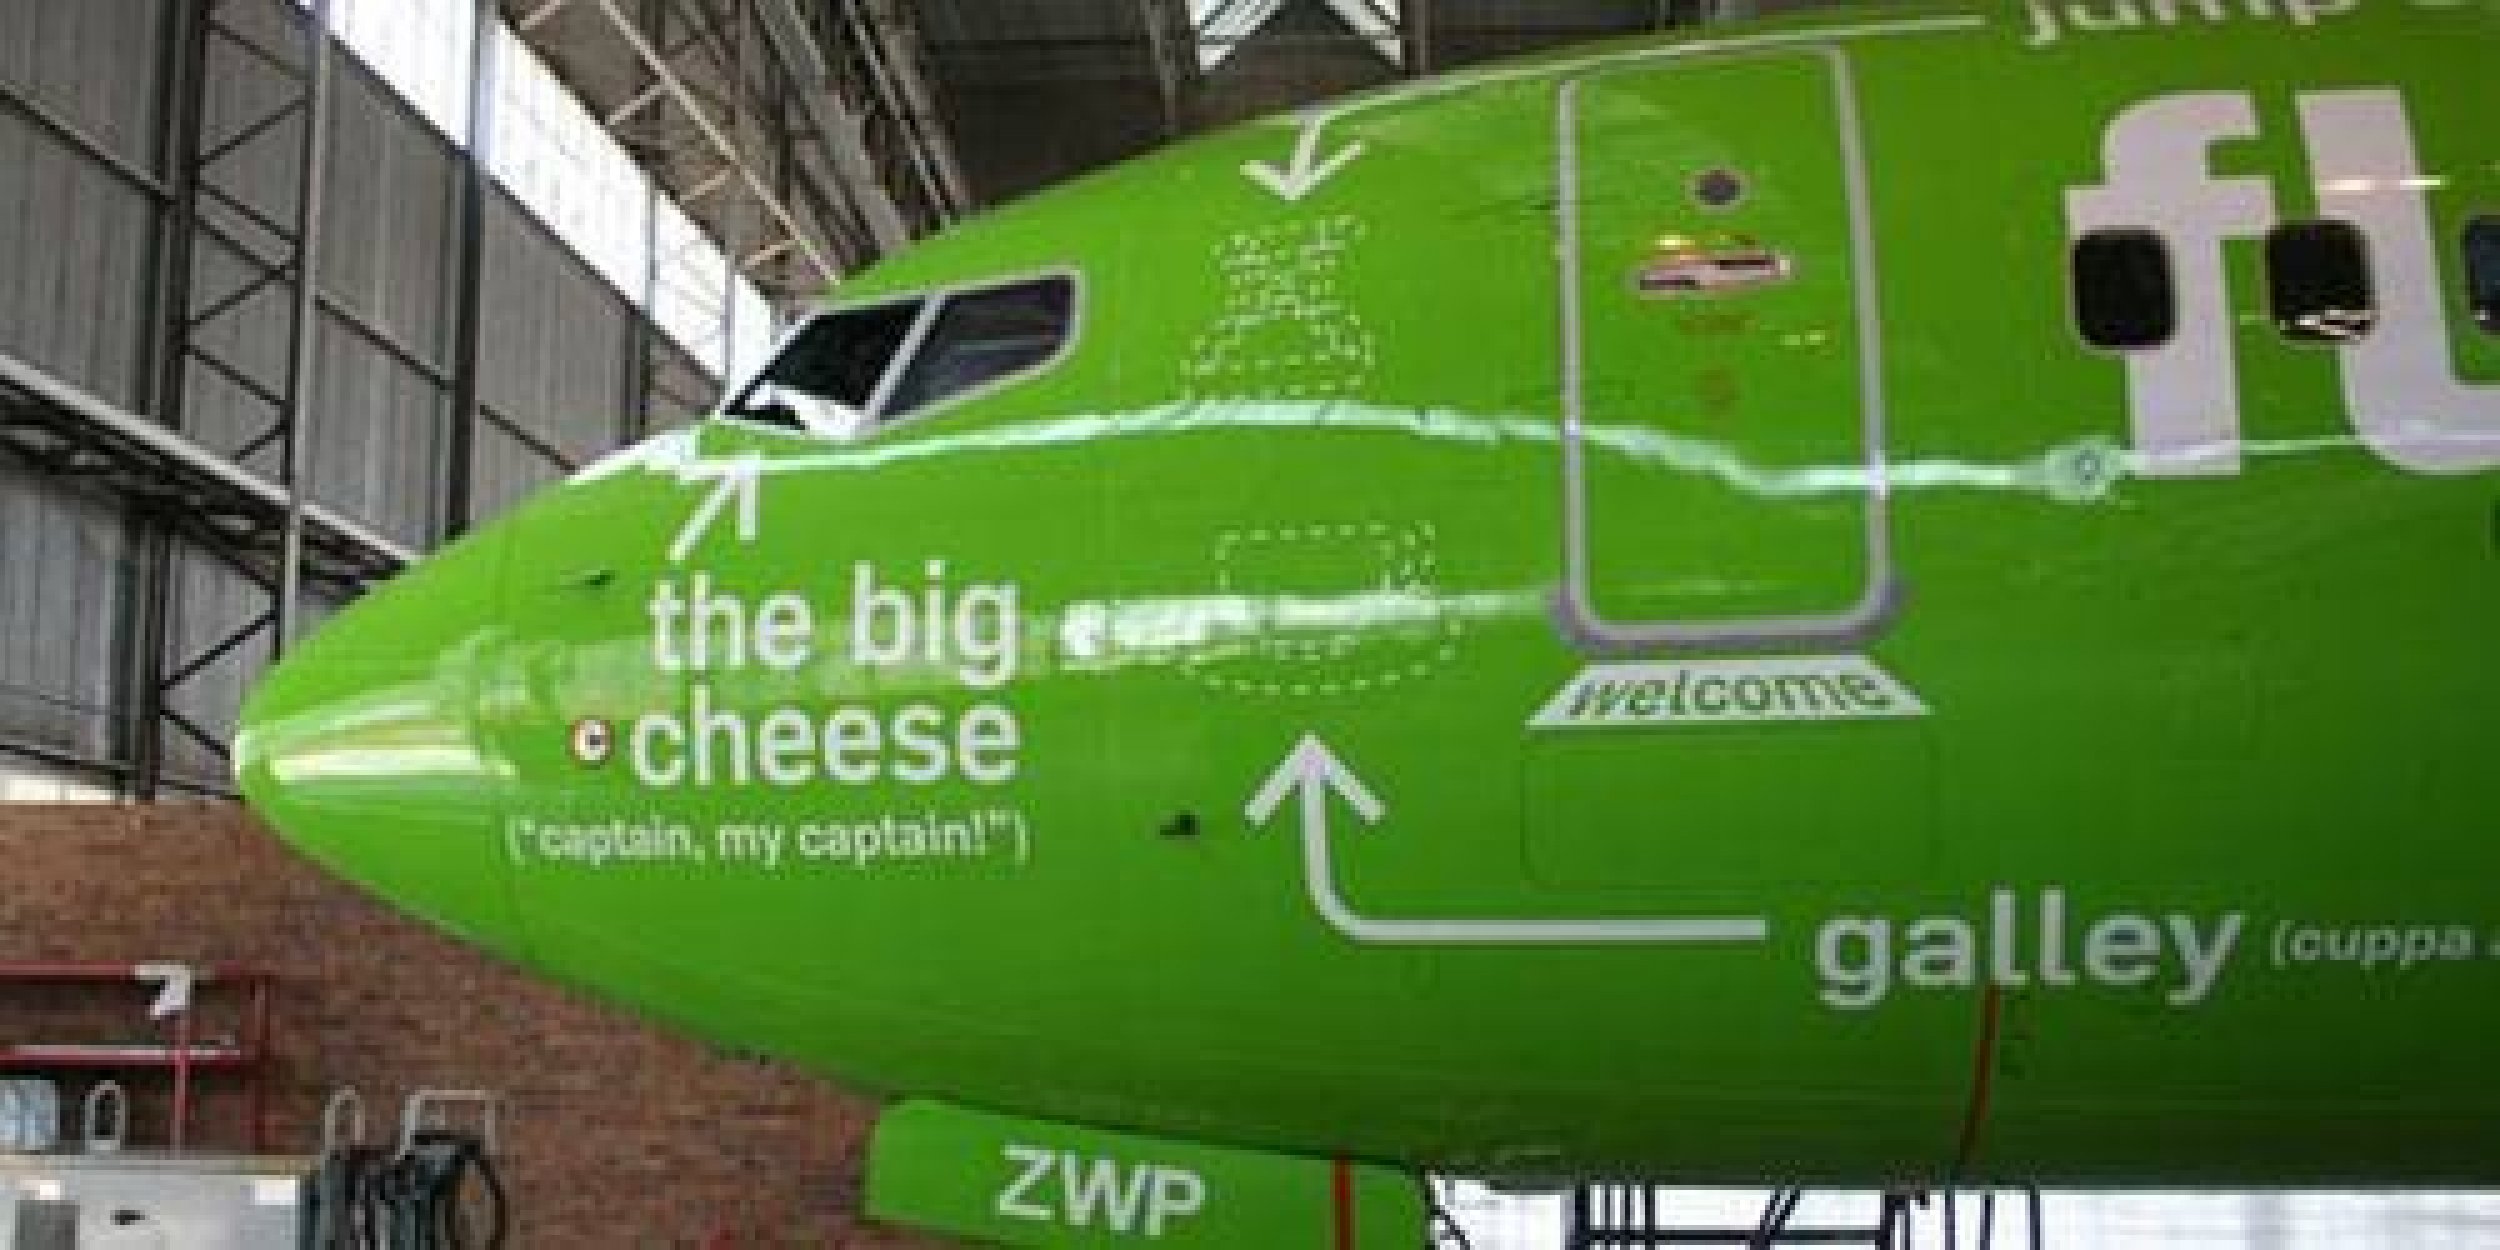 In case you didnt know the different parts of an airplane, Kulula Airlines has marked its own jet to tell you what everything is. Here, you can see where quotthe big cheesequot sits and where they make the coffee.